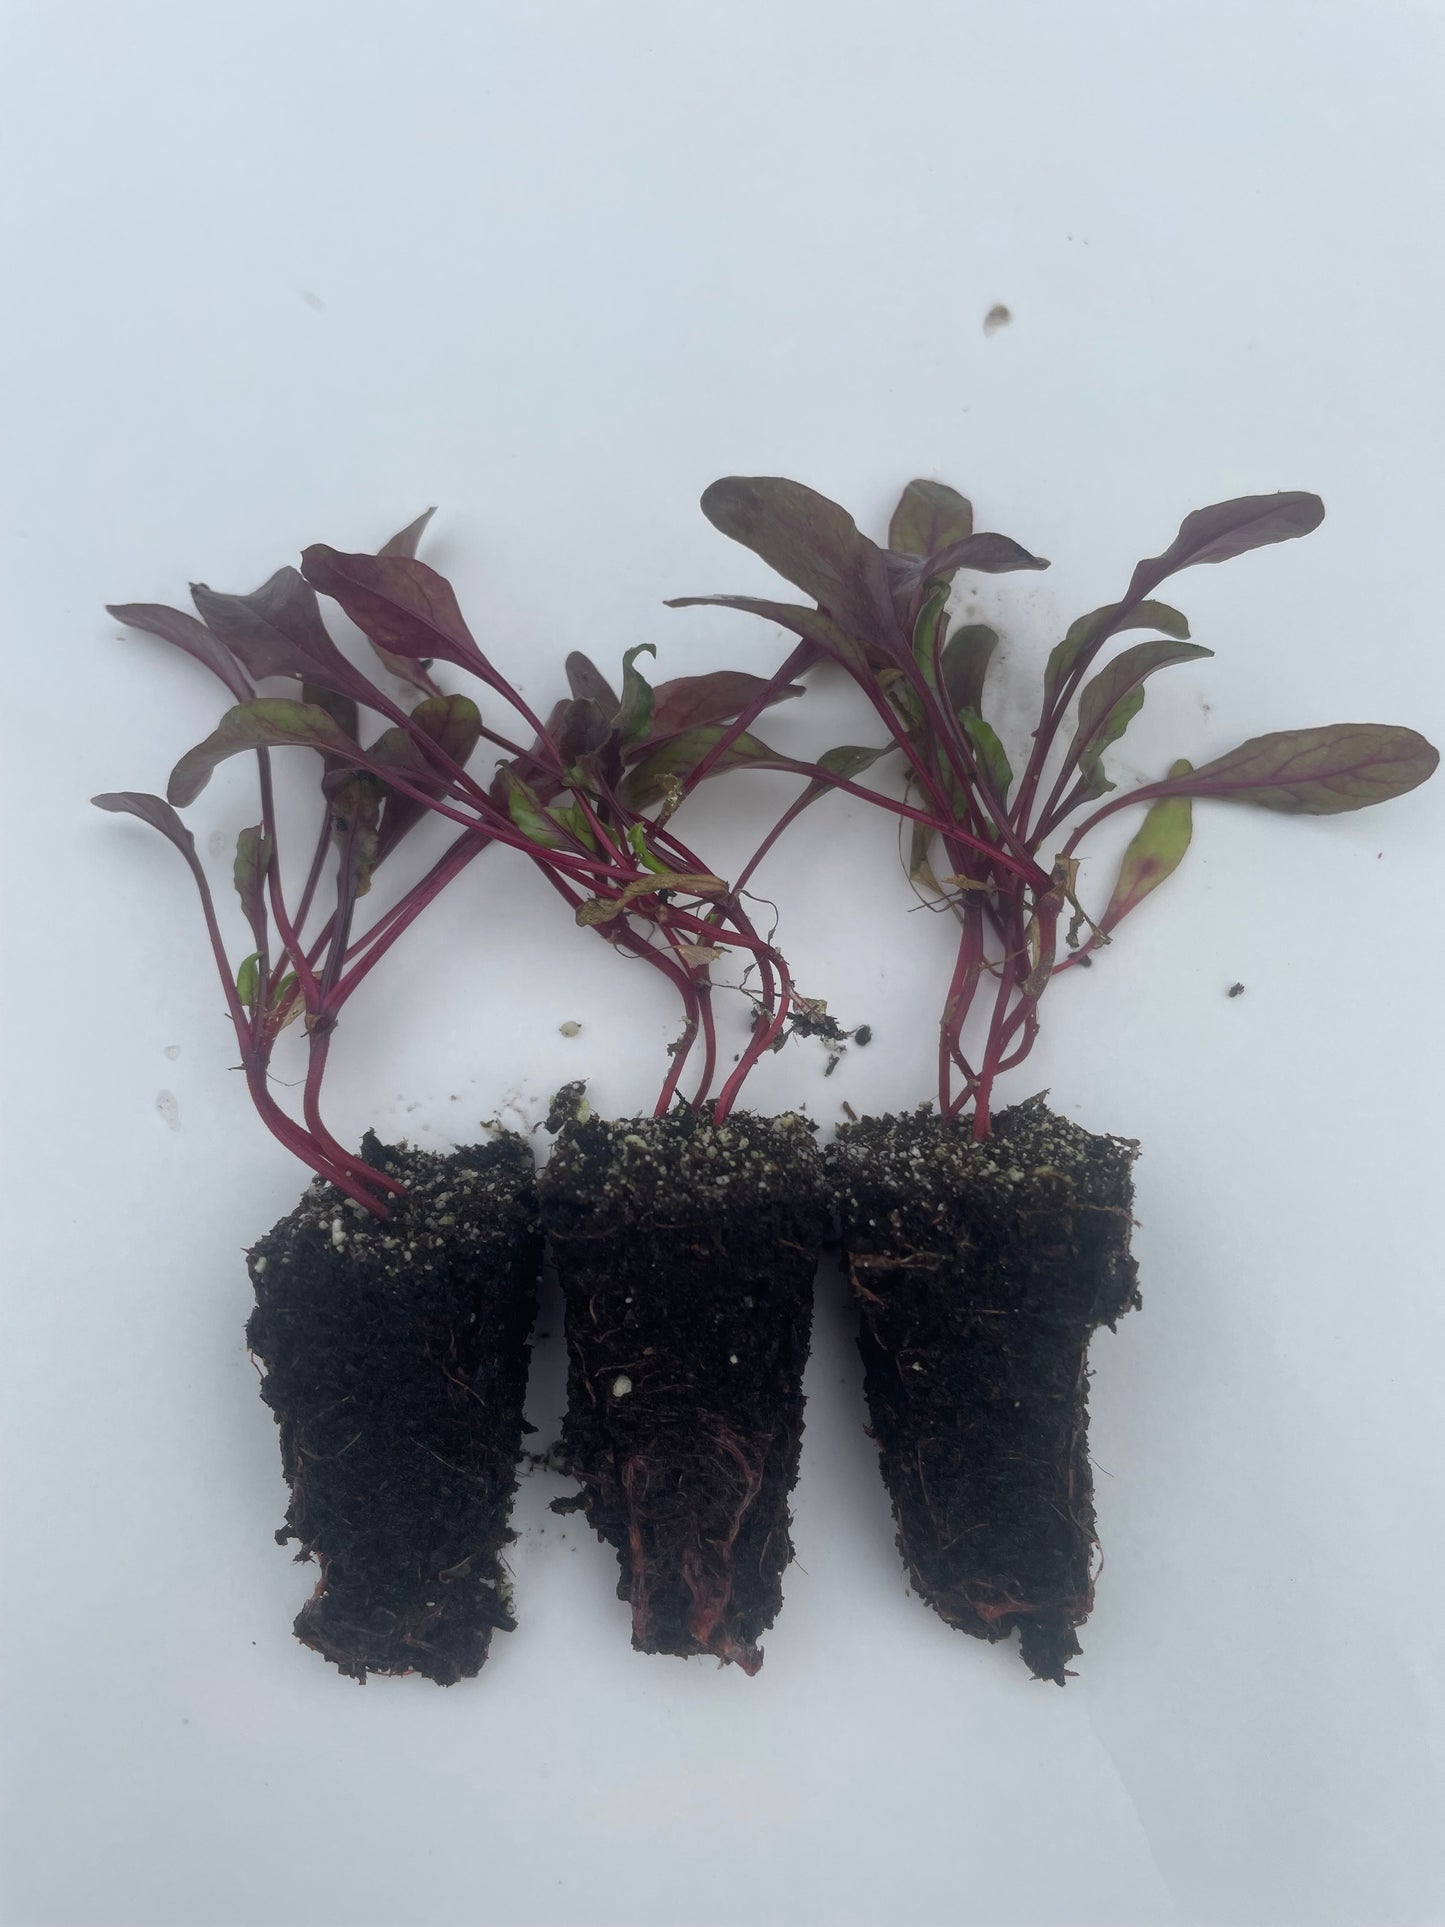 Beetroot Plug Plants - "Grow Your Own" Vegetables **Letterbox Friendly**